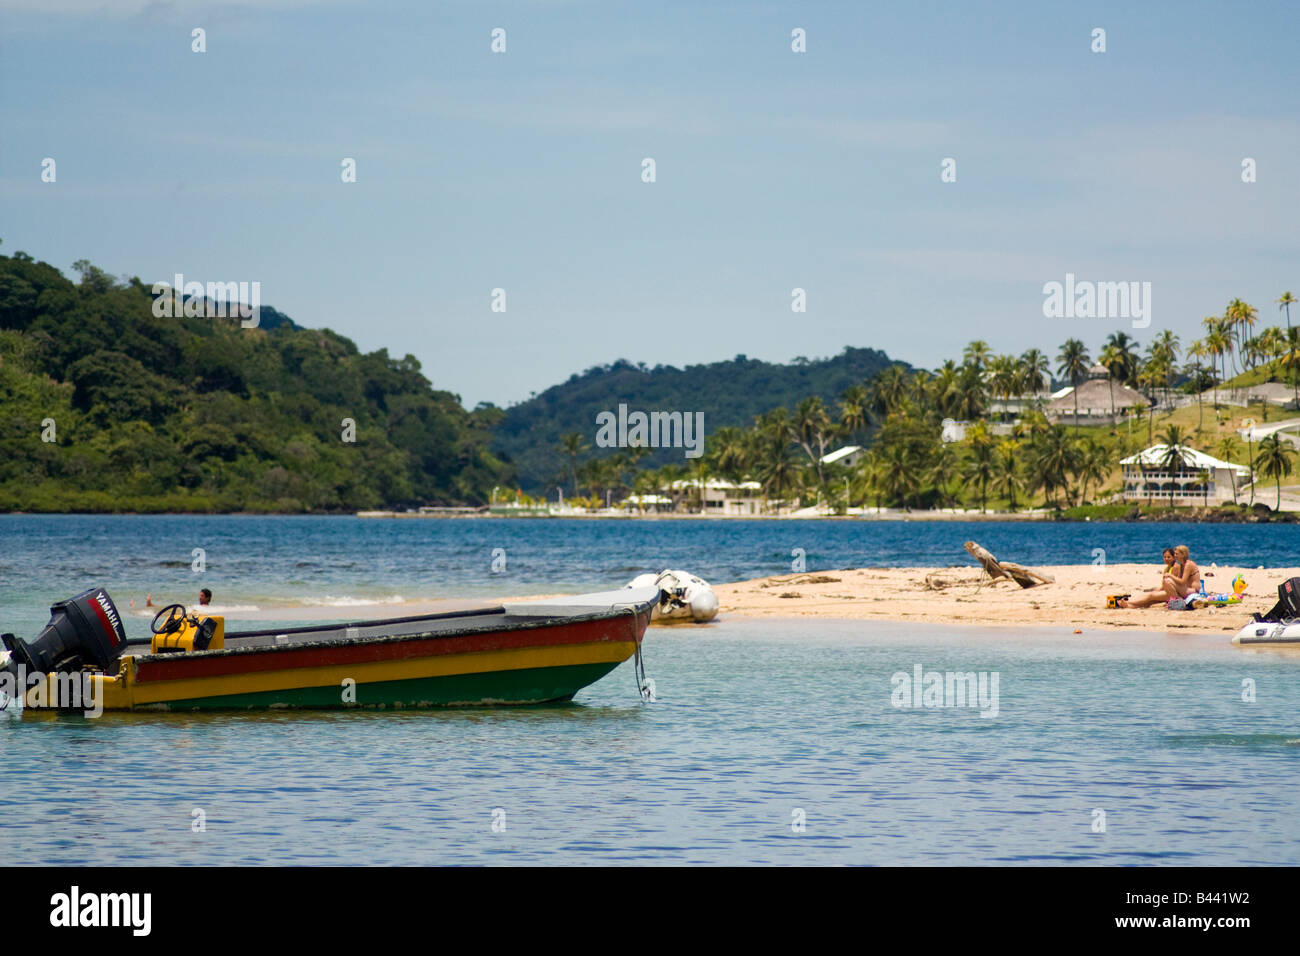 Panama, Isla Grande, Small peninsula of sand is good as natural port for a colorful boat Stock Photo